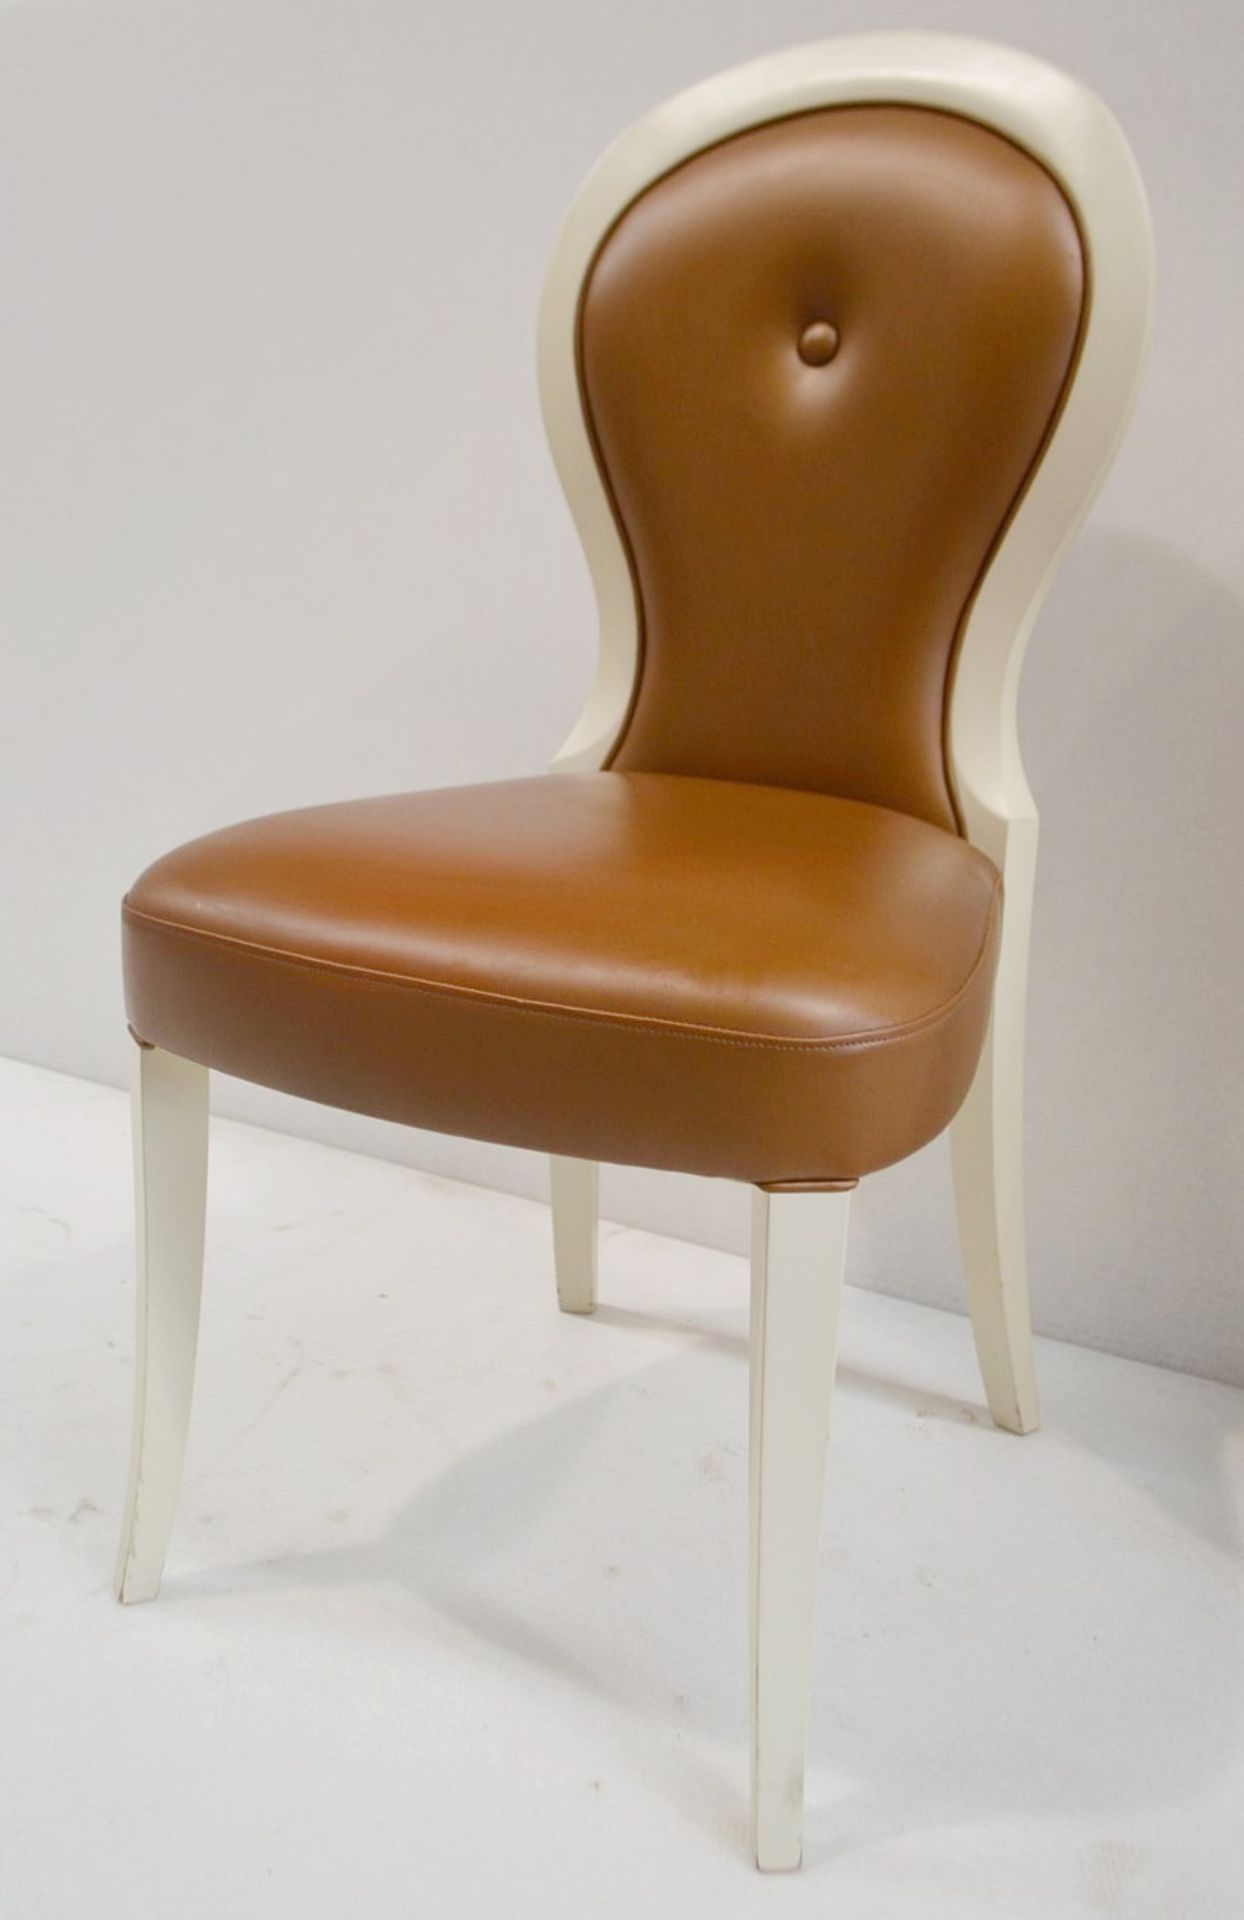 1 x Cushion Backed Chair With Curved Legs - Dimensions: H100 x W49 x D50cm / Seat 48cm - Ref: HMS126 - Image 5 of 7